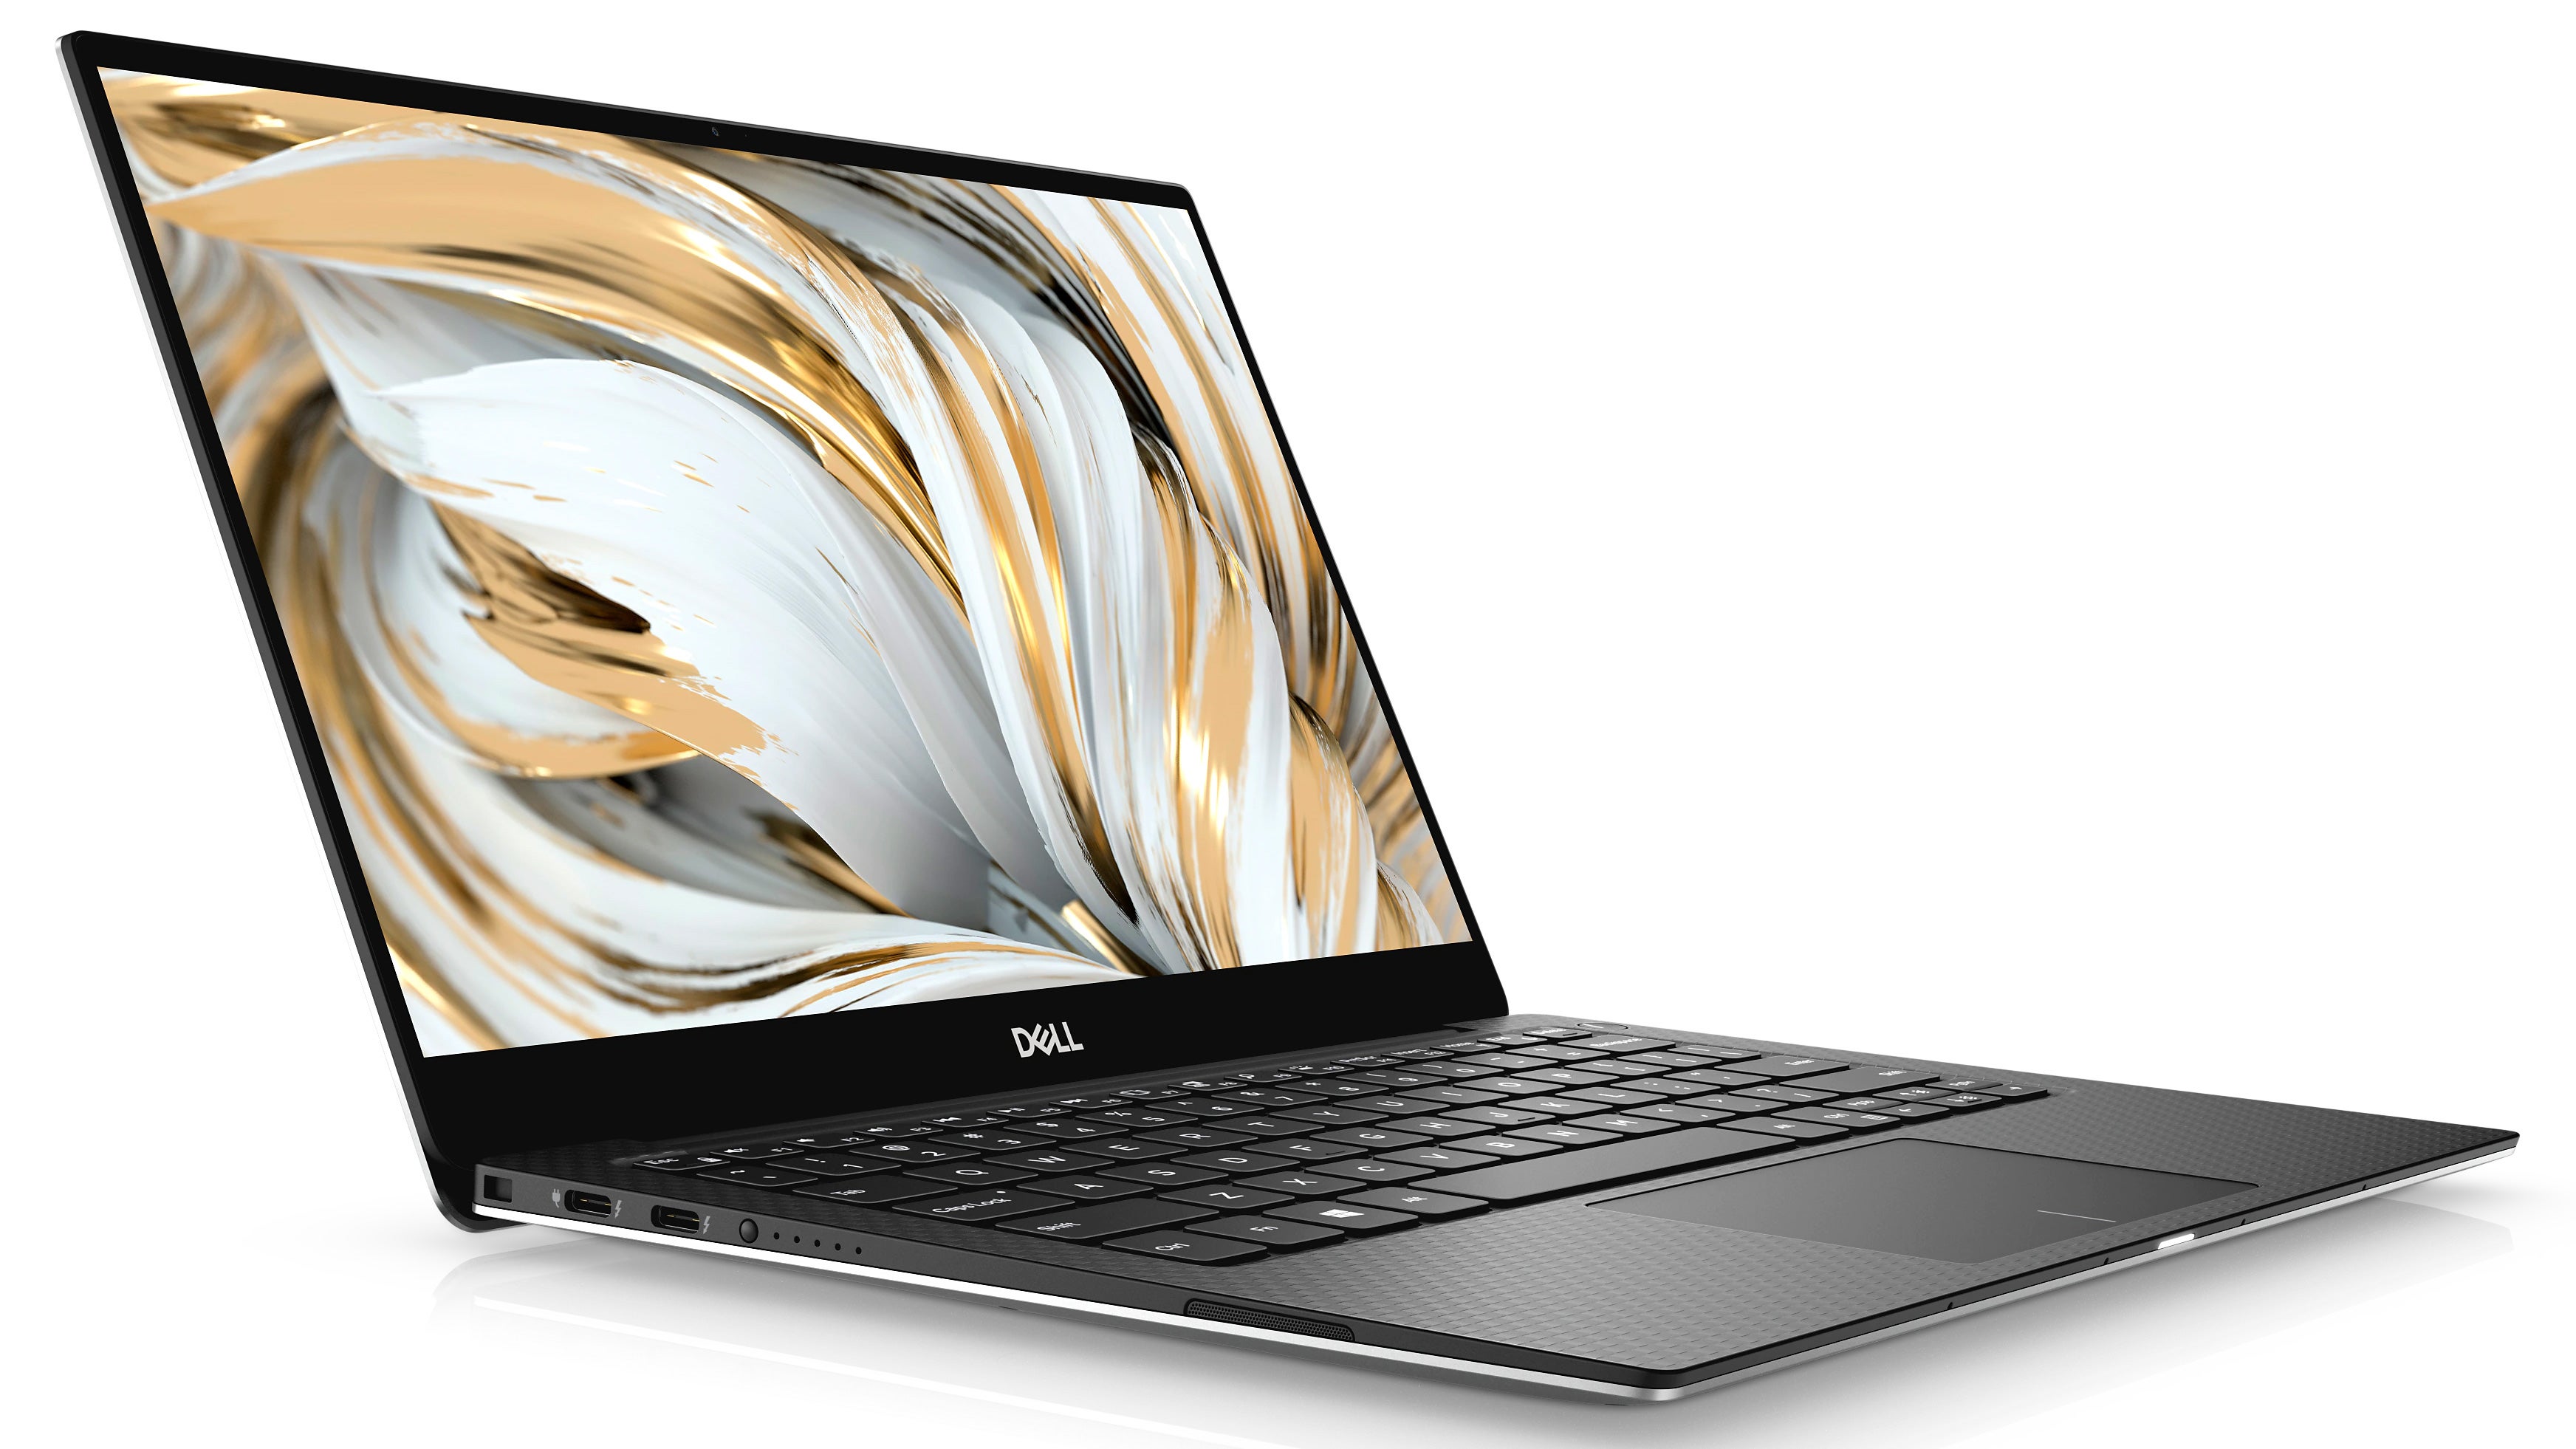 images of dell gaming and work laptops, specifically the xps 13